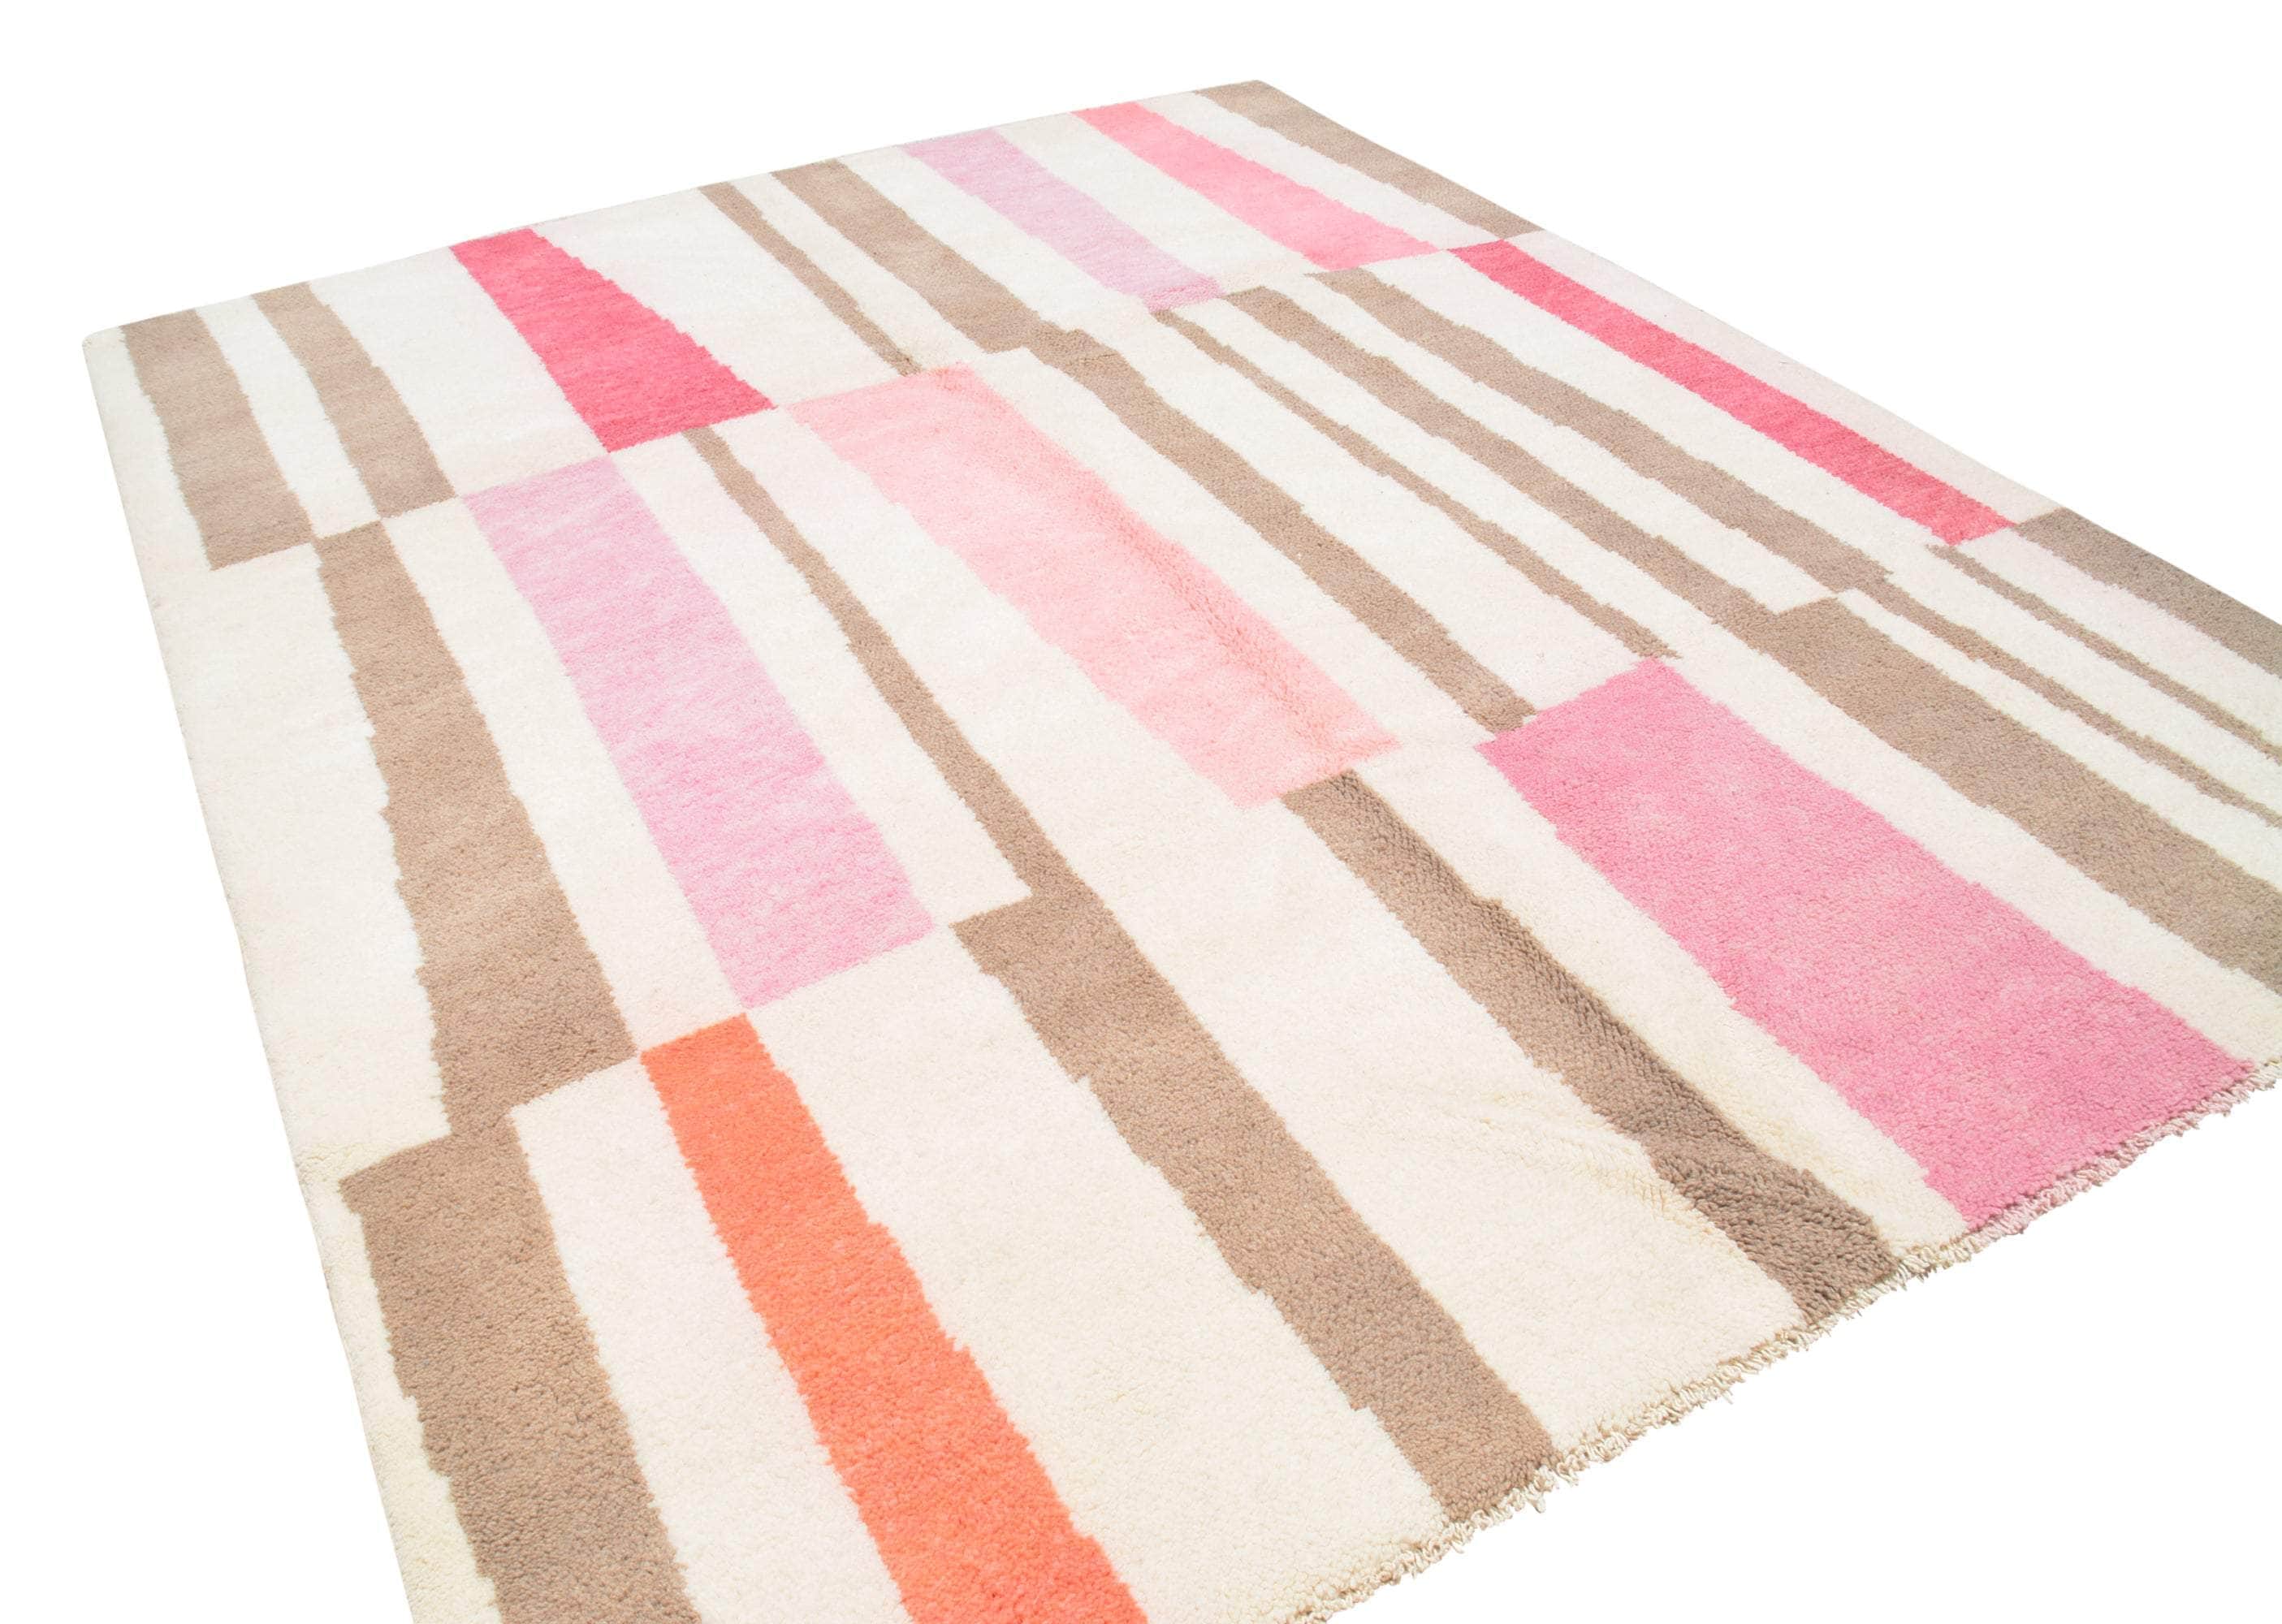 Blushing Trails | Handmade Moroccan Rug with Soft Pink Lines